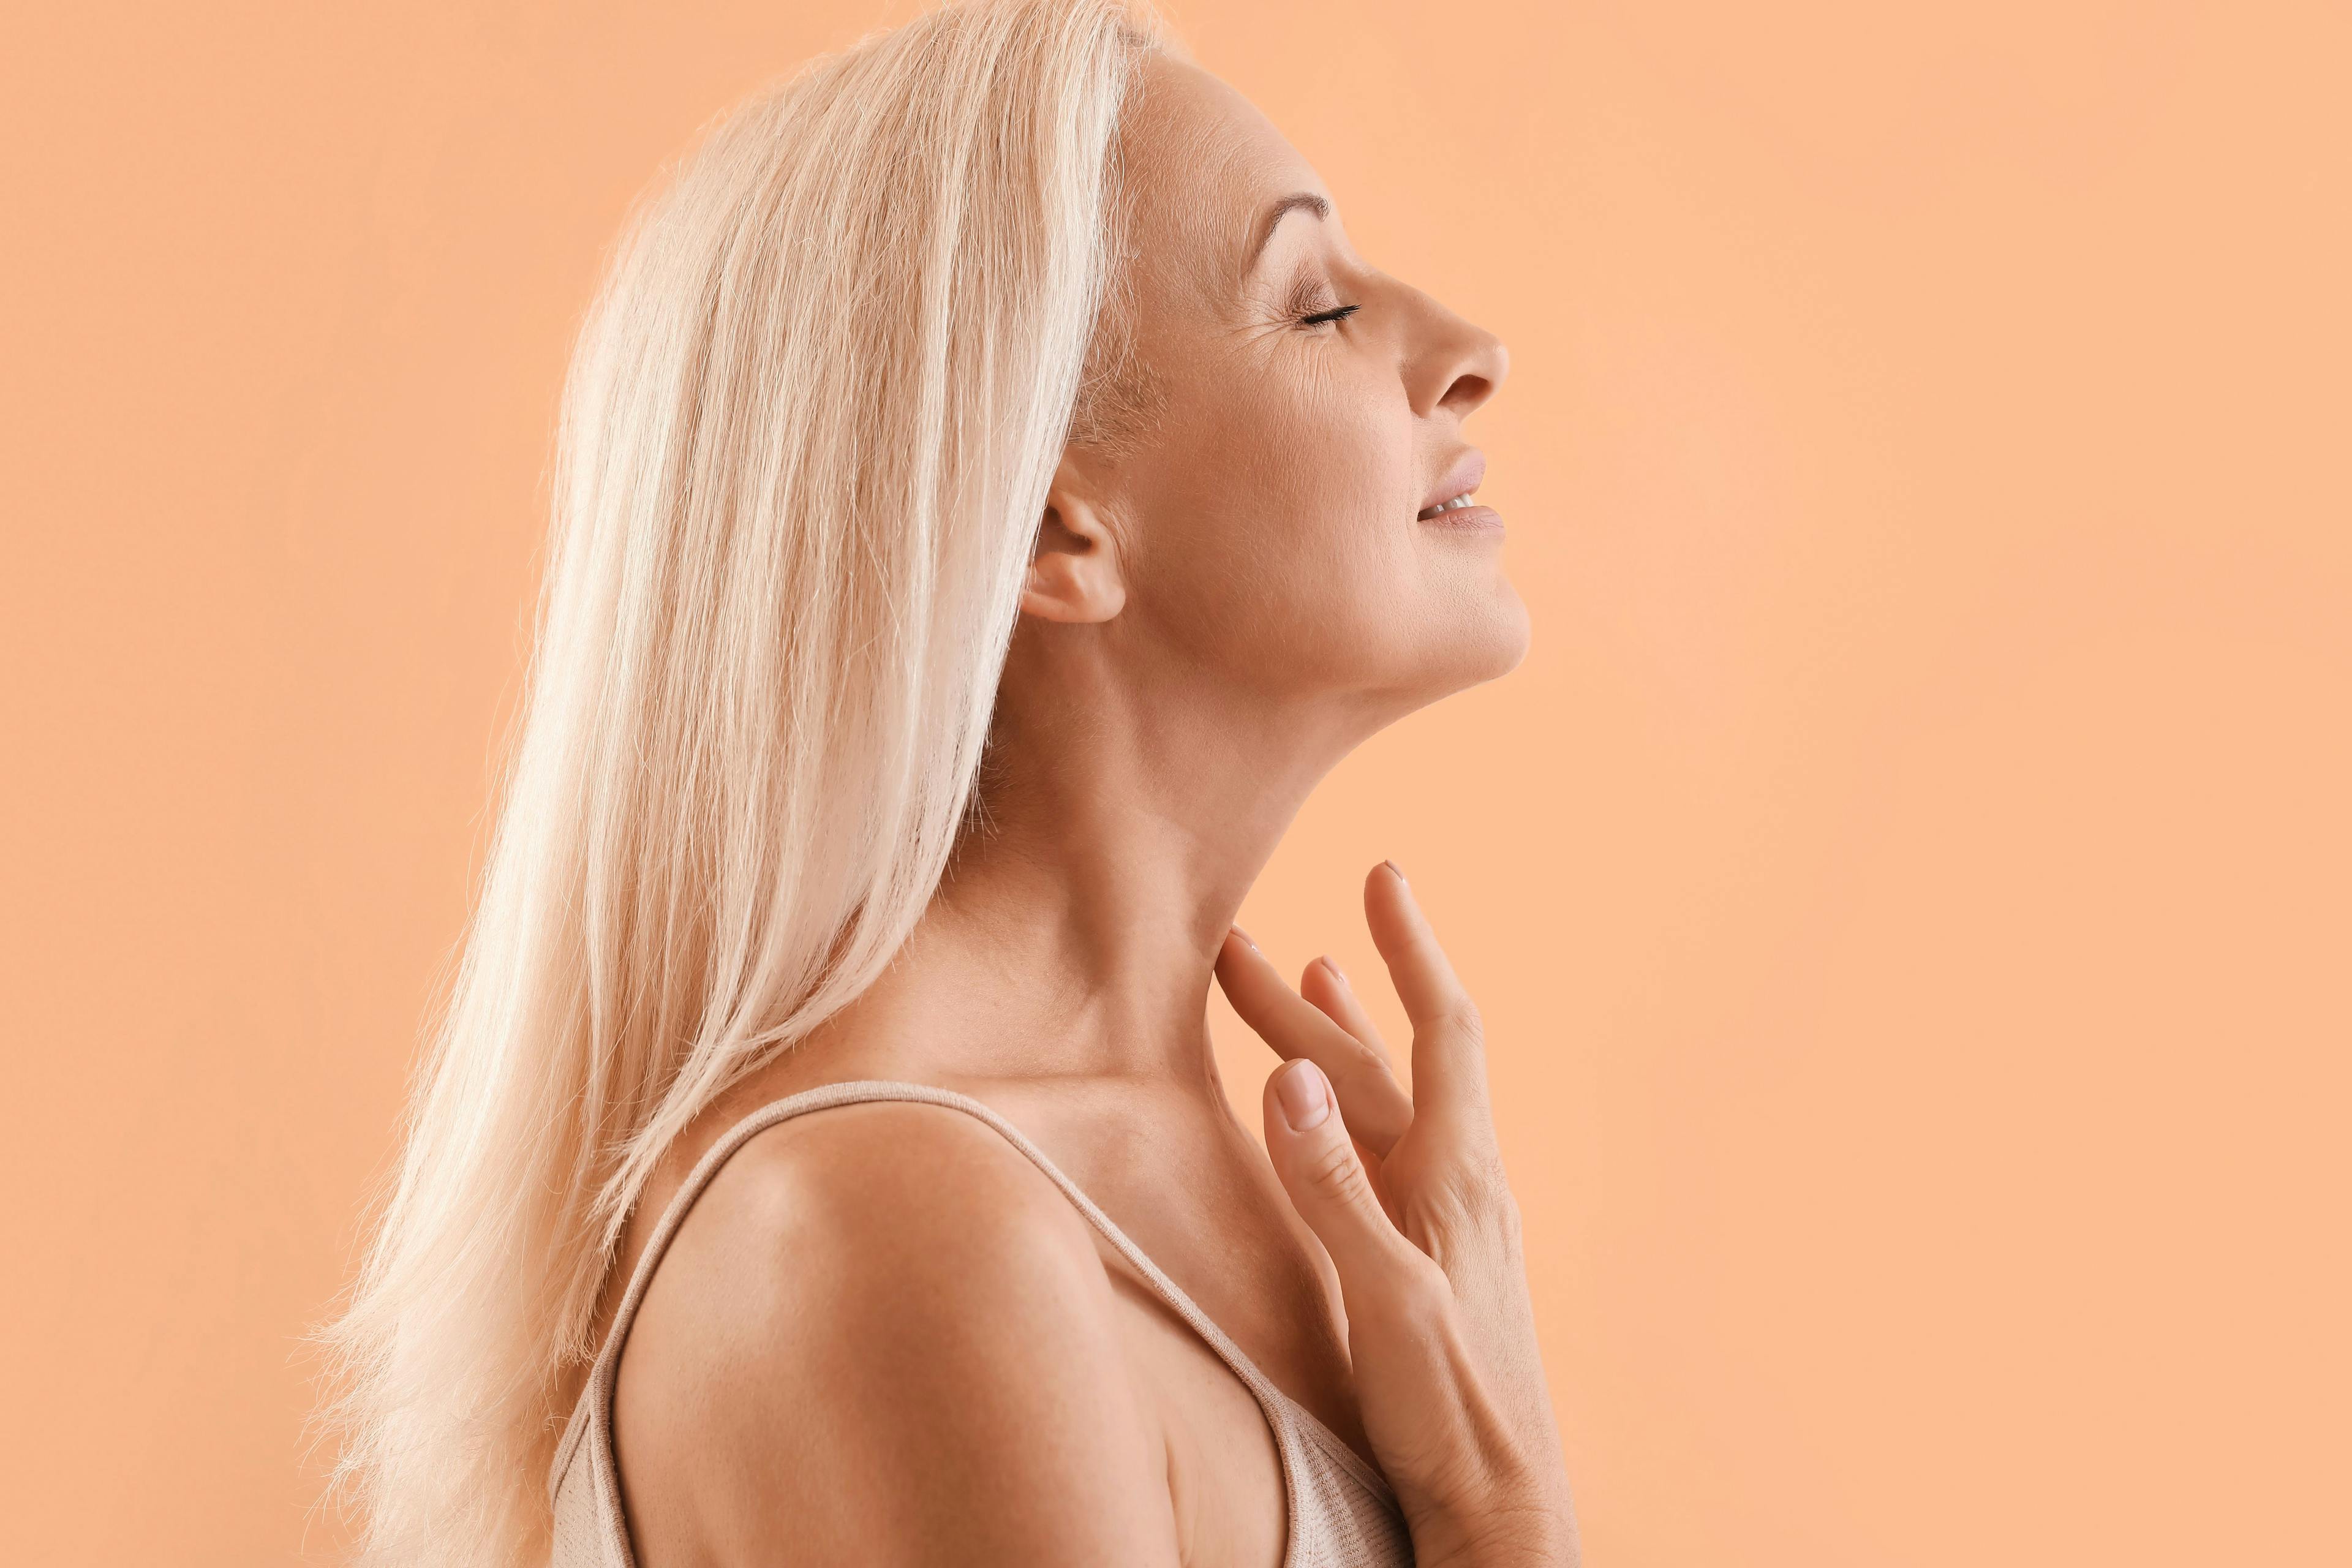 Neck Cream Reduces Signs of Aging in 2 Clinical Trials